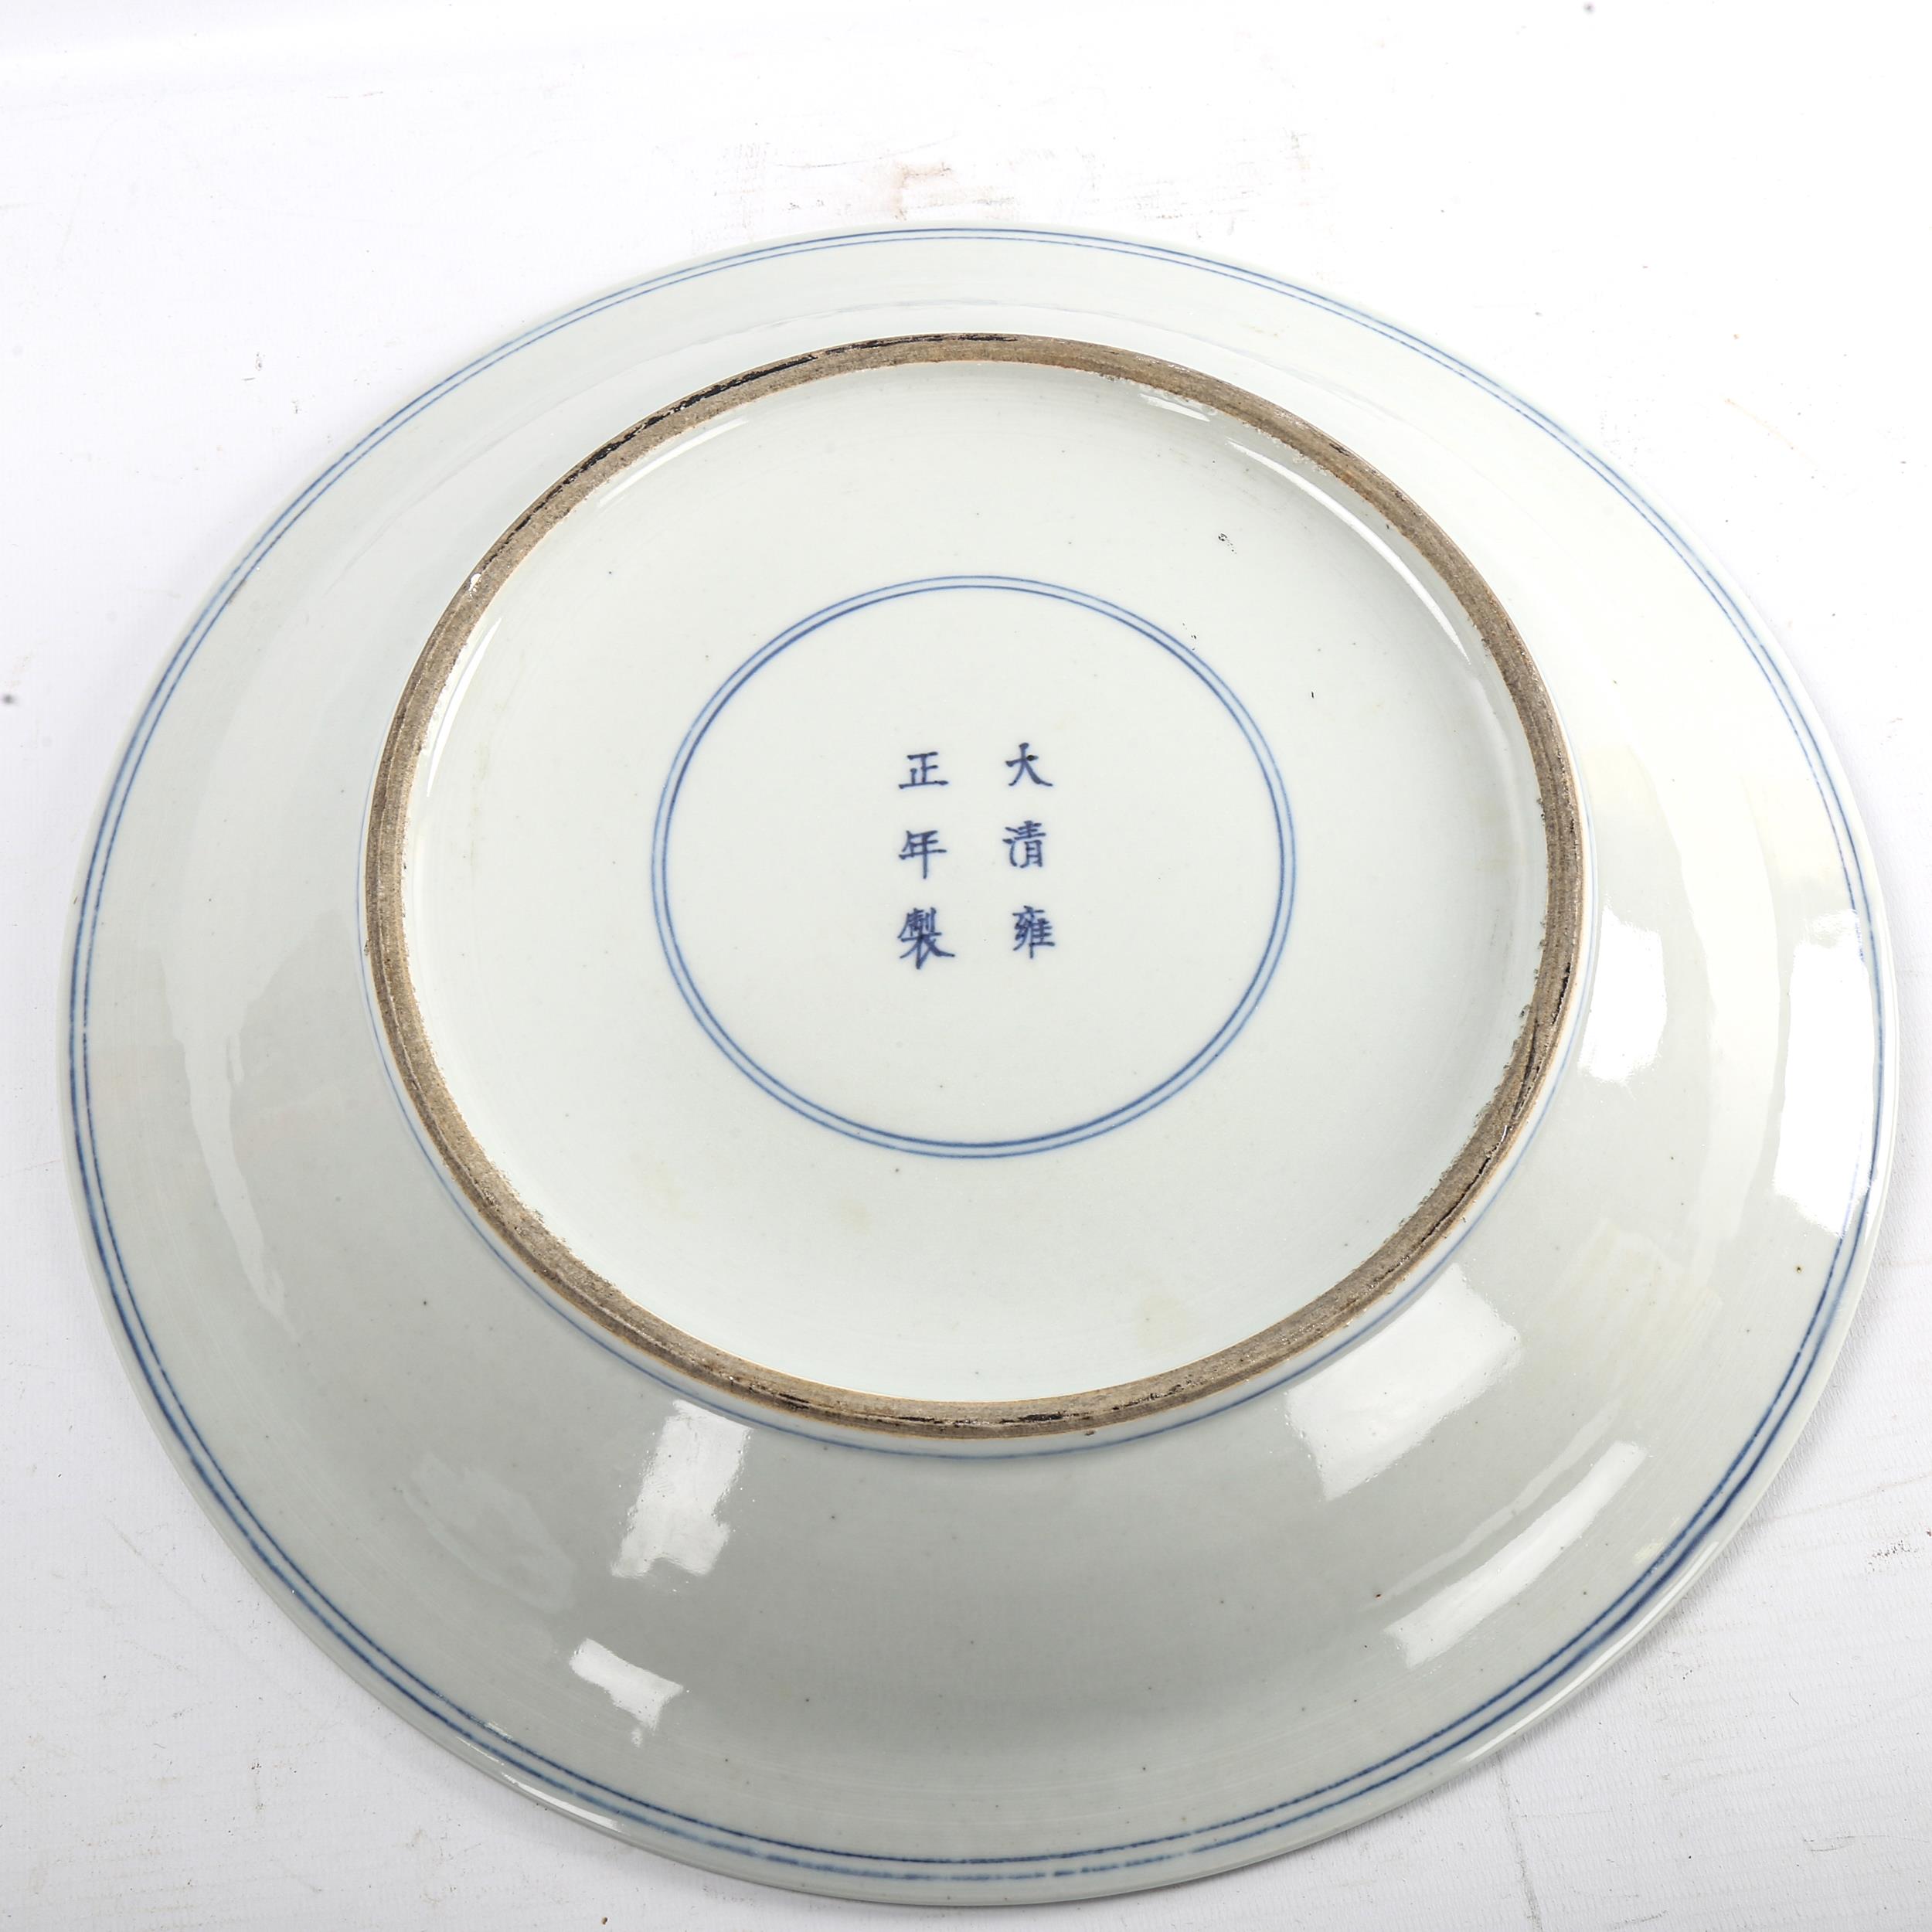 A Chinese blue and white porcelain bowl with fish decoration, 6 character mark, diameter 36cm - Image 3 of 3